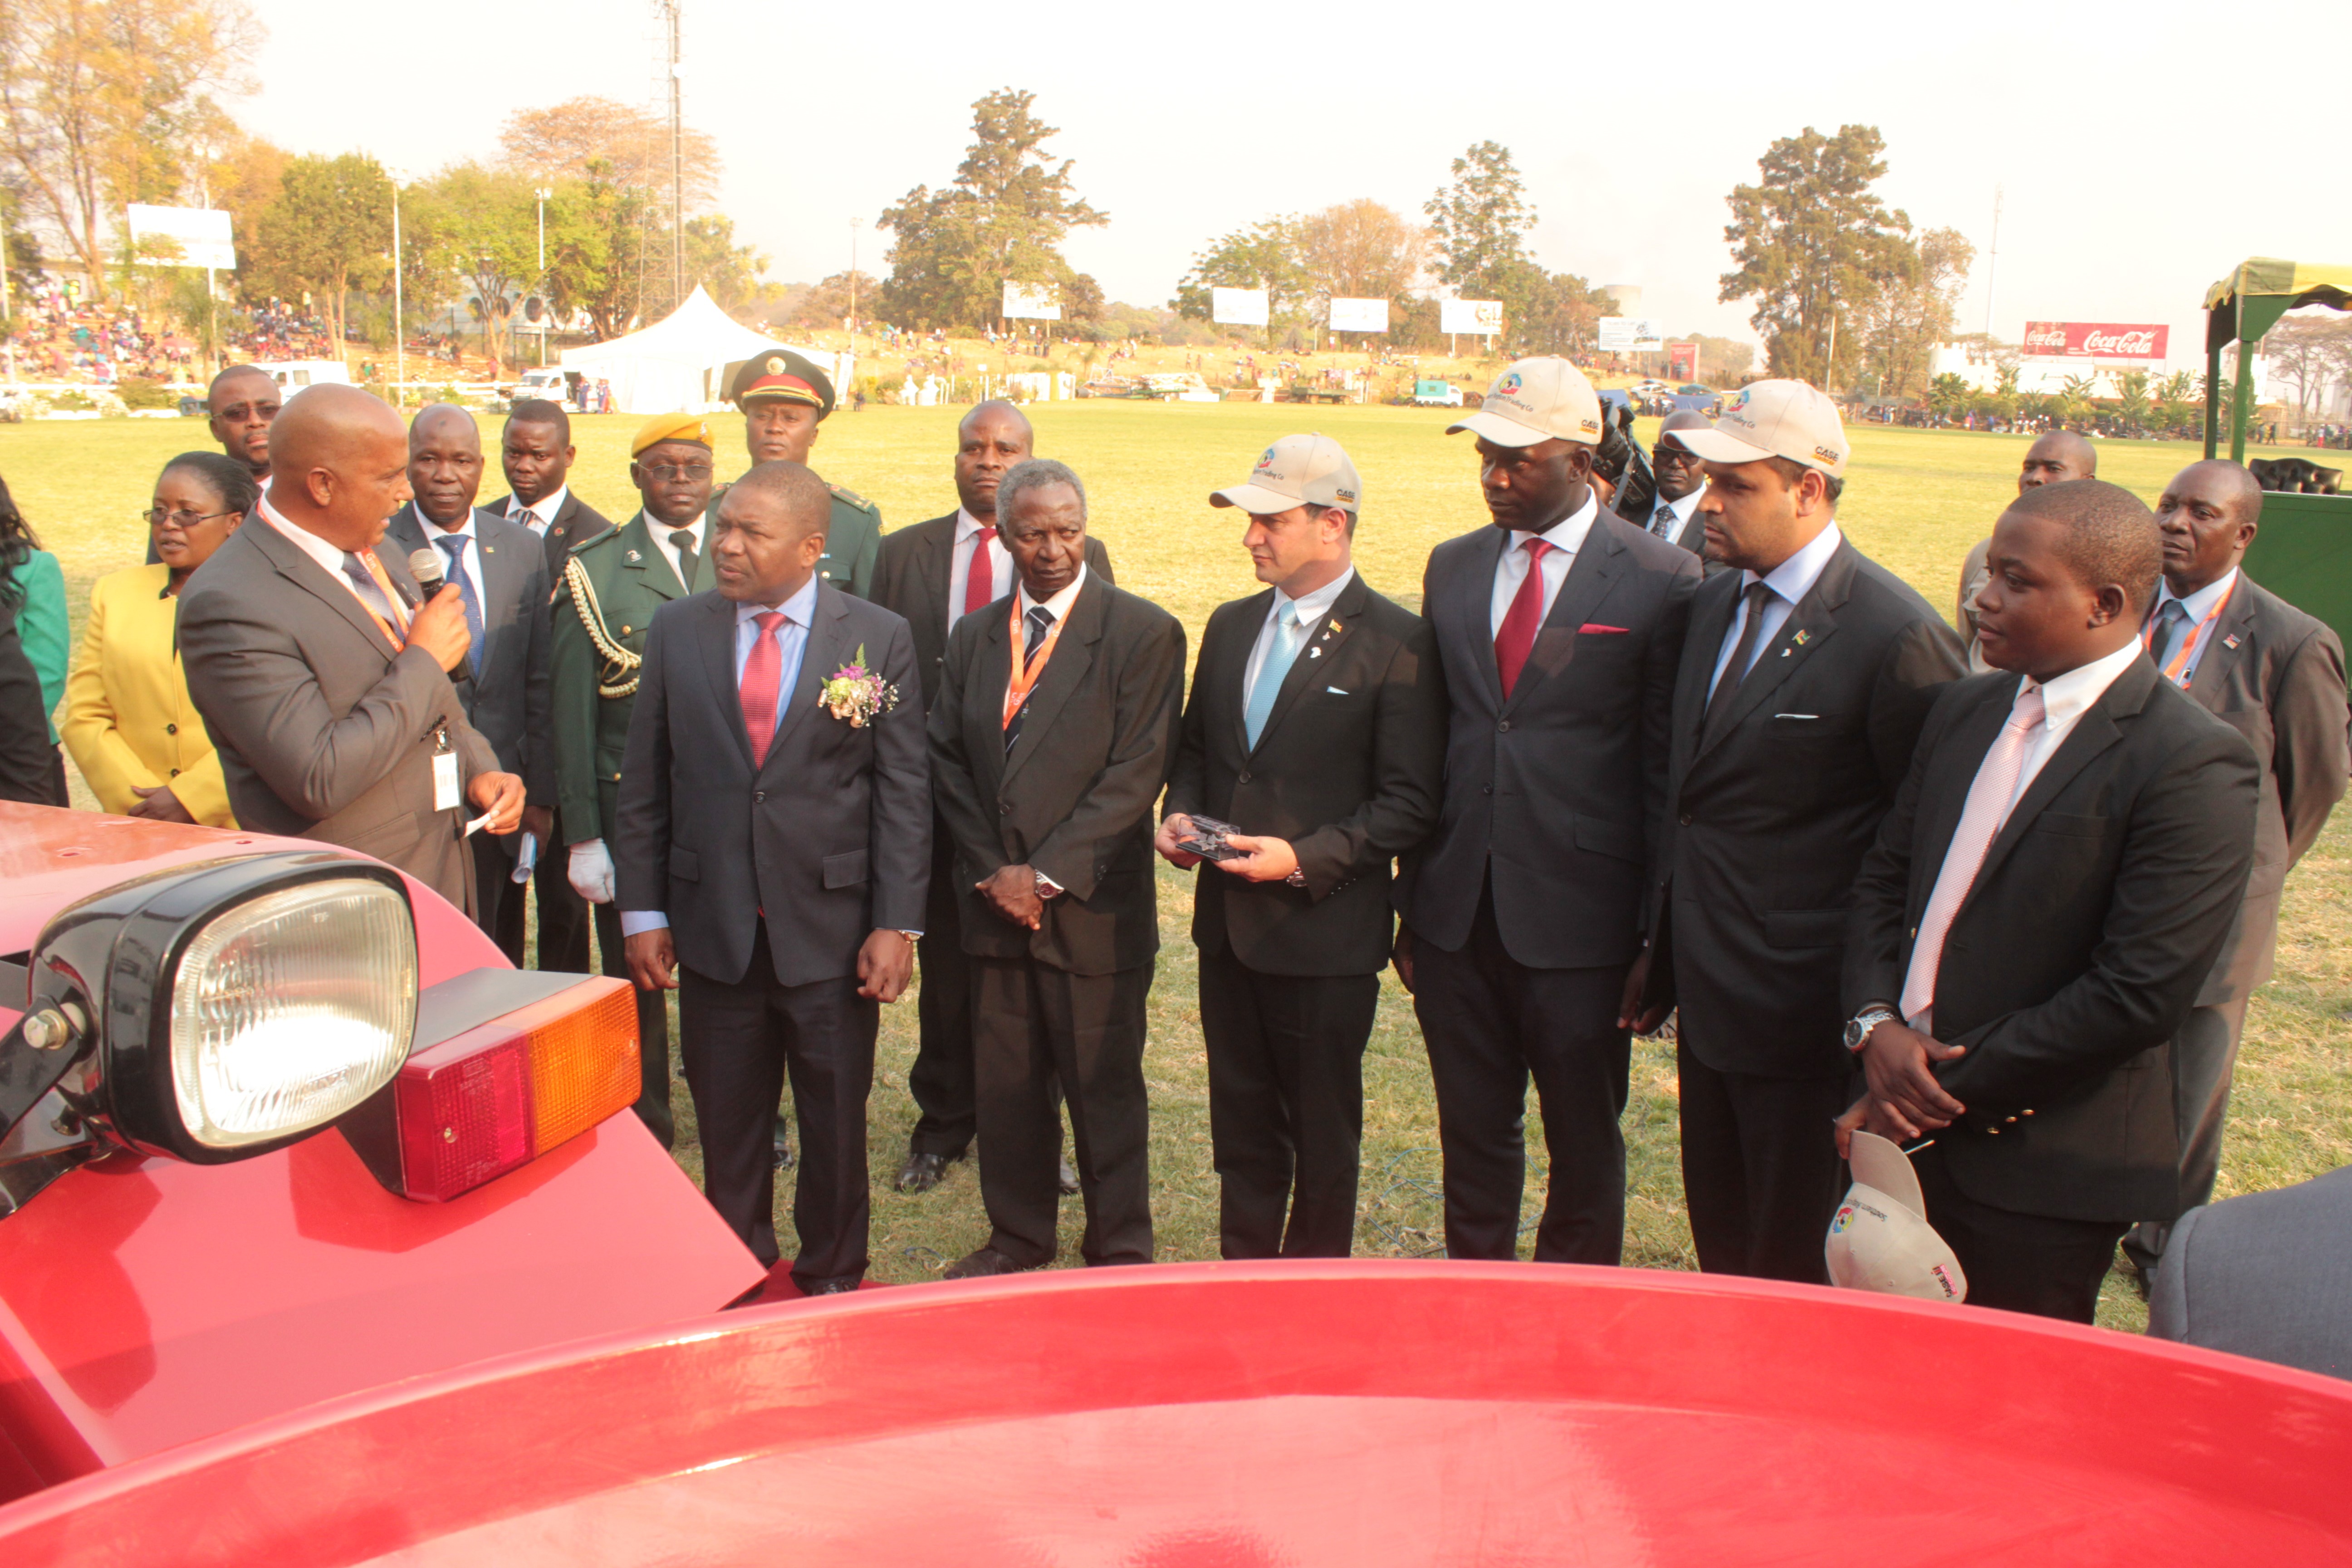 CASE IH SPONSORS FARMER OF THE YEAR AWARD AT HARARE AGRICULTURAL SHOW